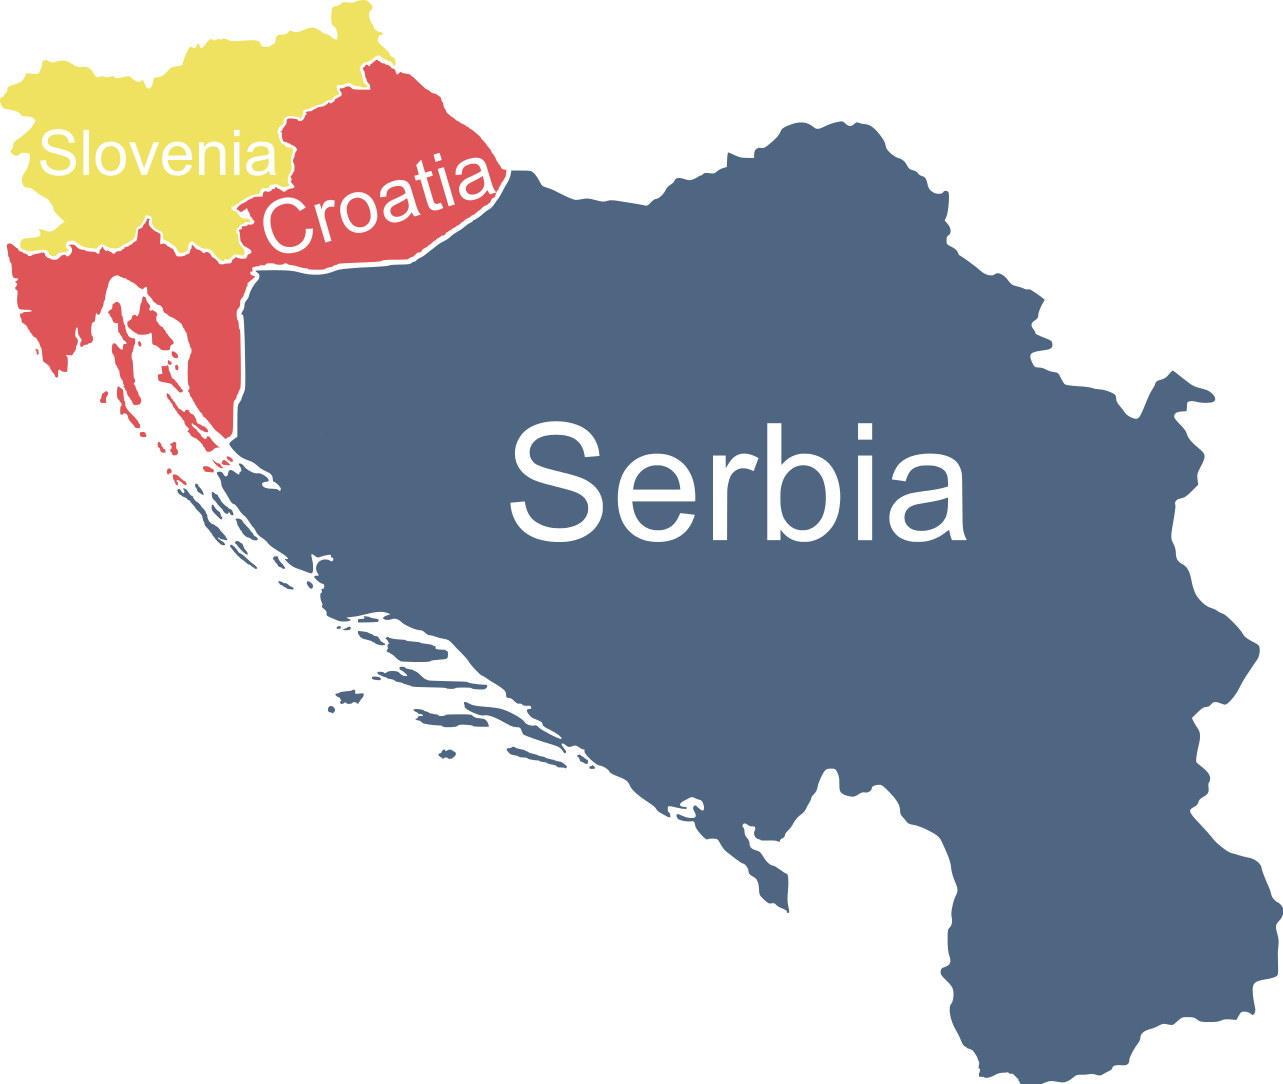 The borders of Greater Serbia as proposed by Šešelj in 1992. Šešelj faces charges for crimes against humanity for his attempts to turn the idea into a reality.